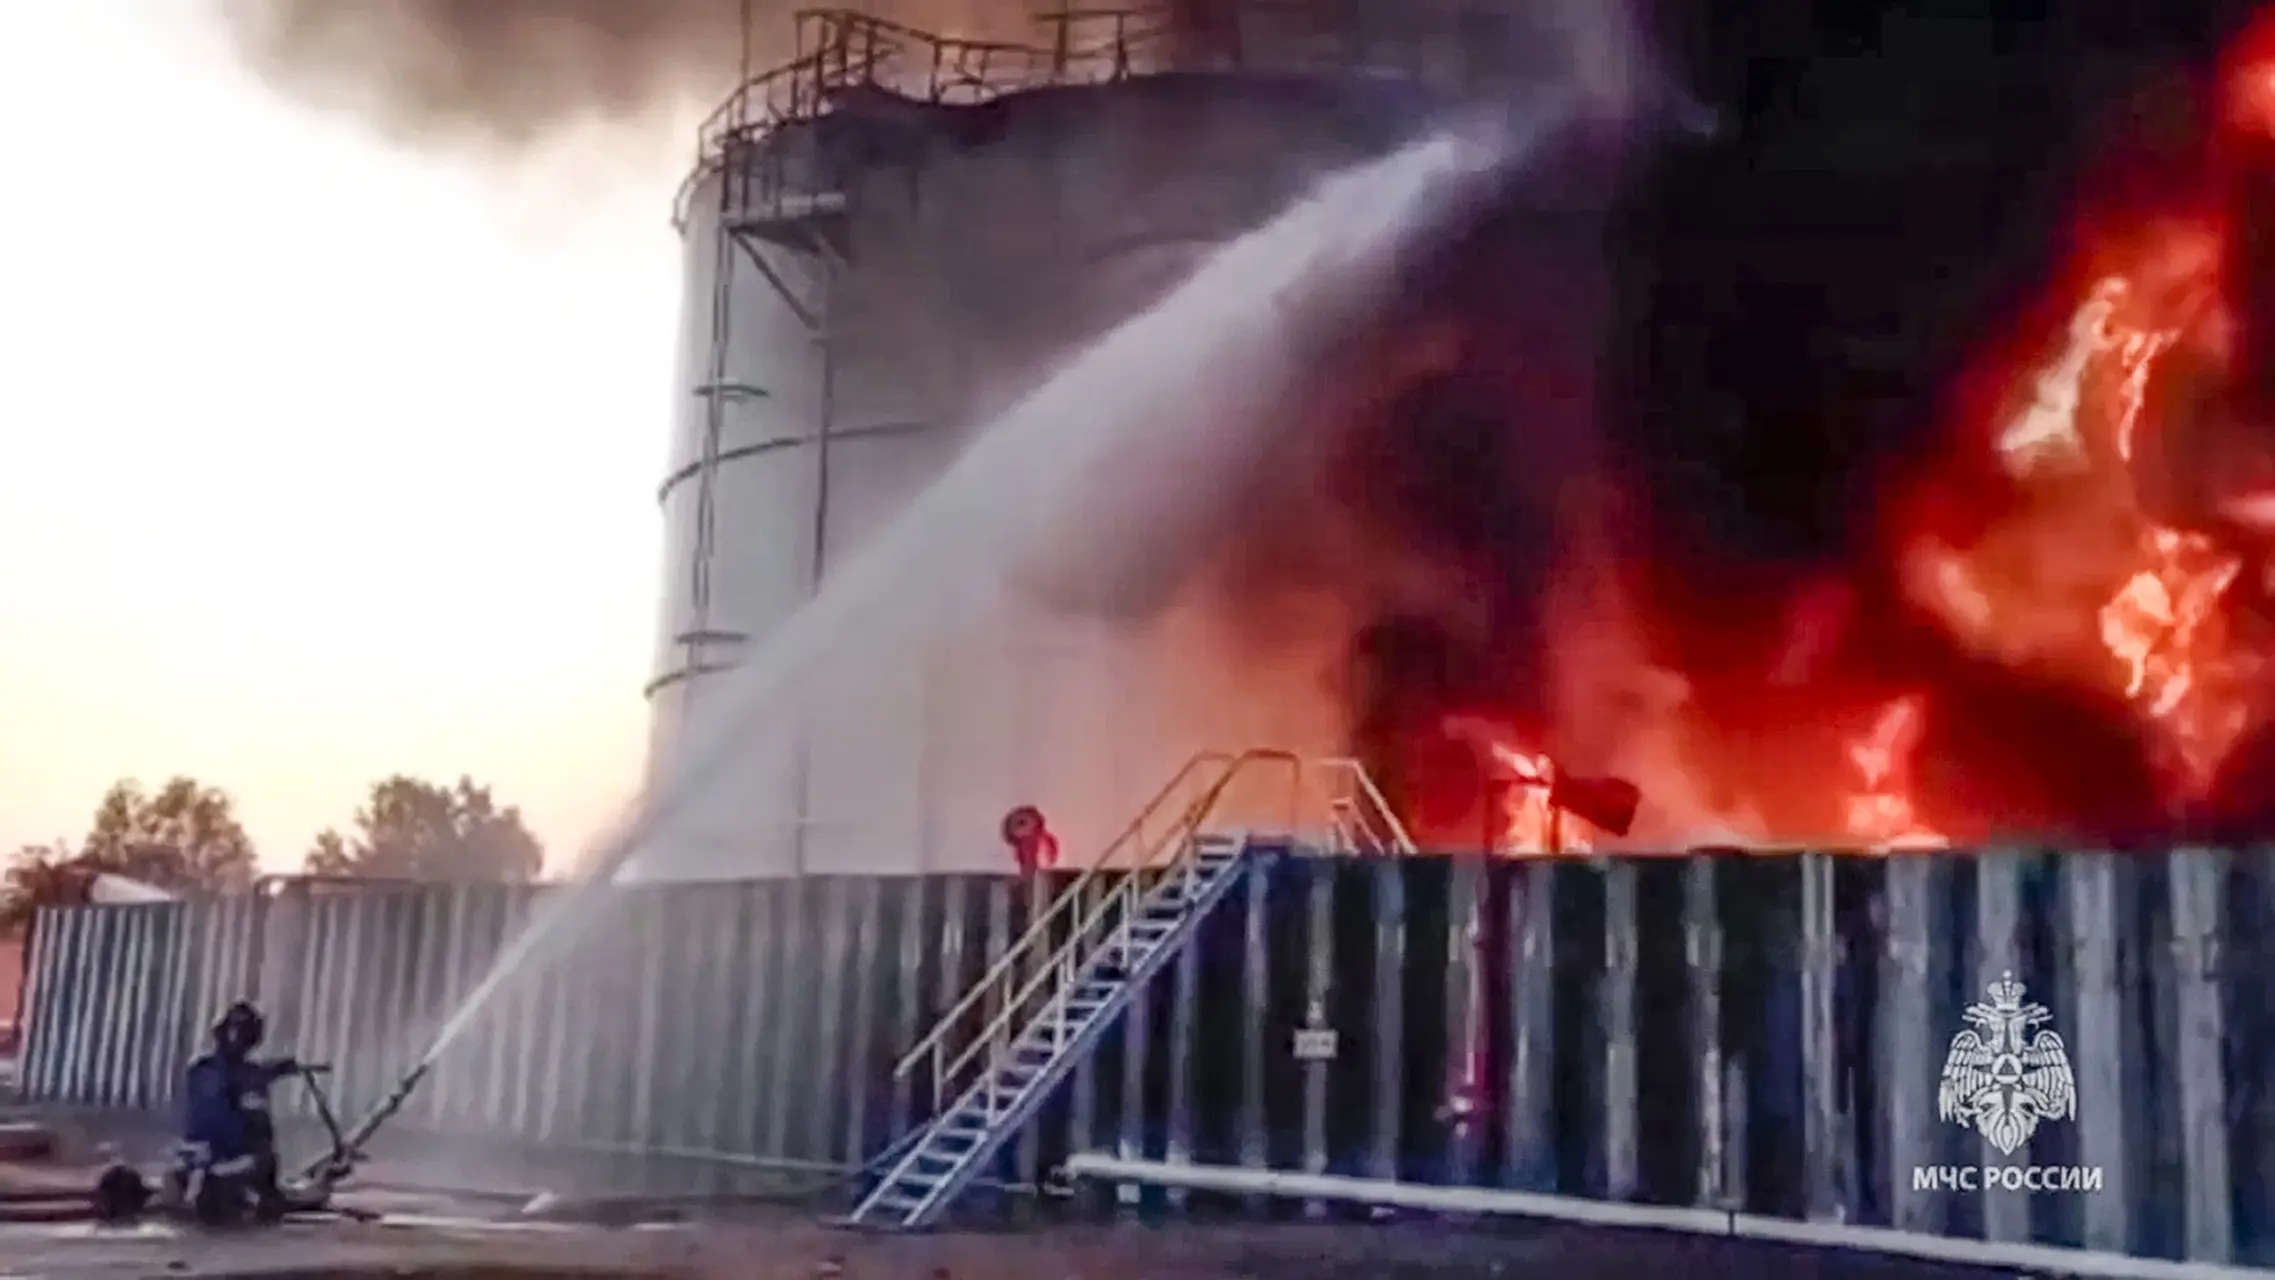 Ukraine claims its drones hit a Russian oil facility, sparking a huge blaze